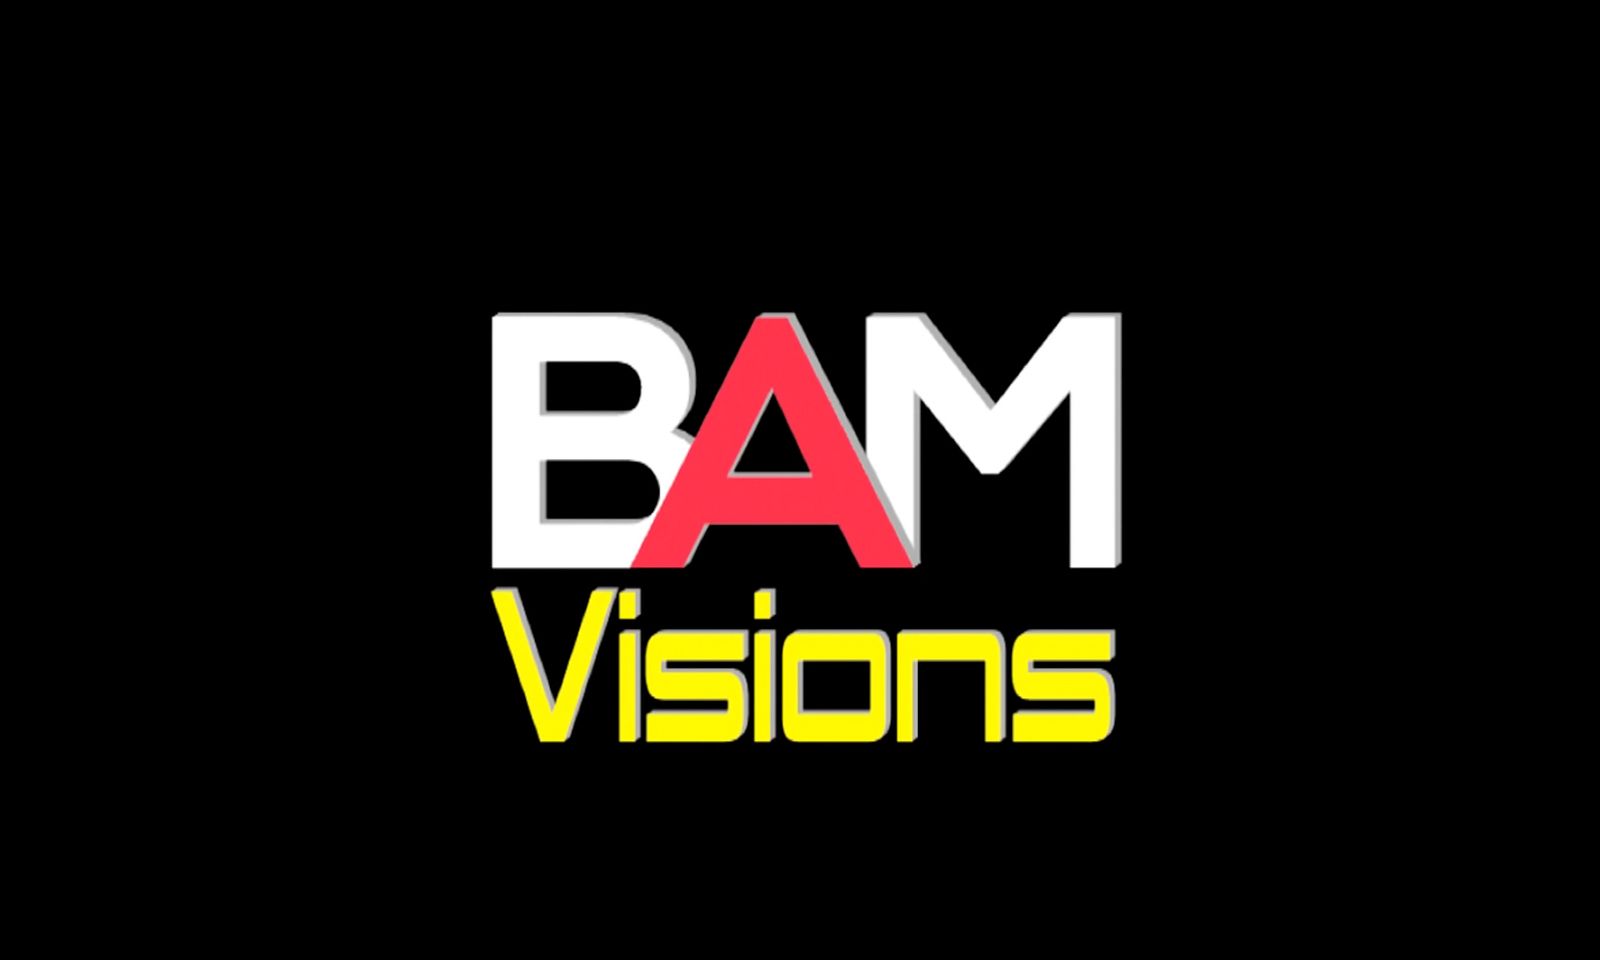 BAM Visions Responsible for ‘Anally Corrupted Teens’